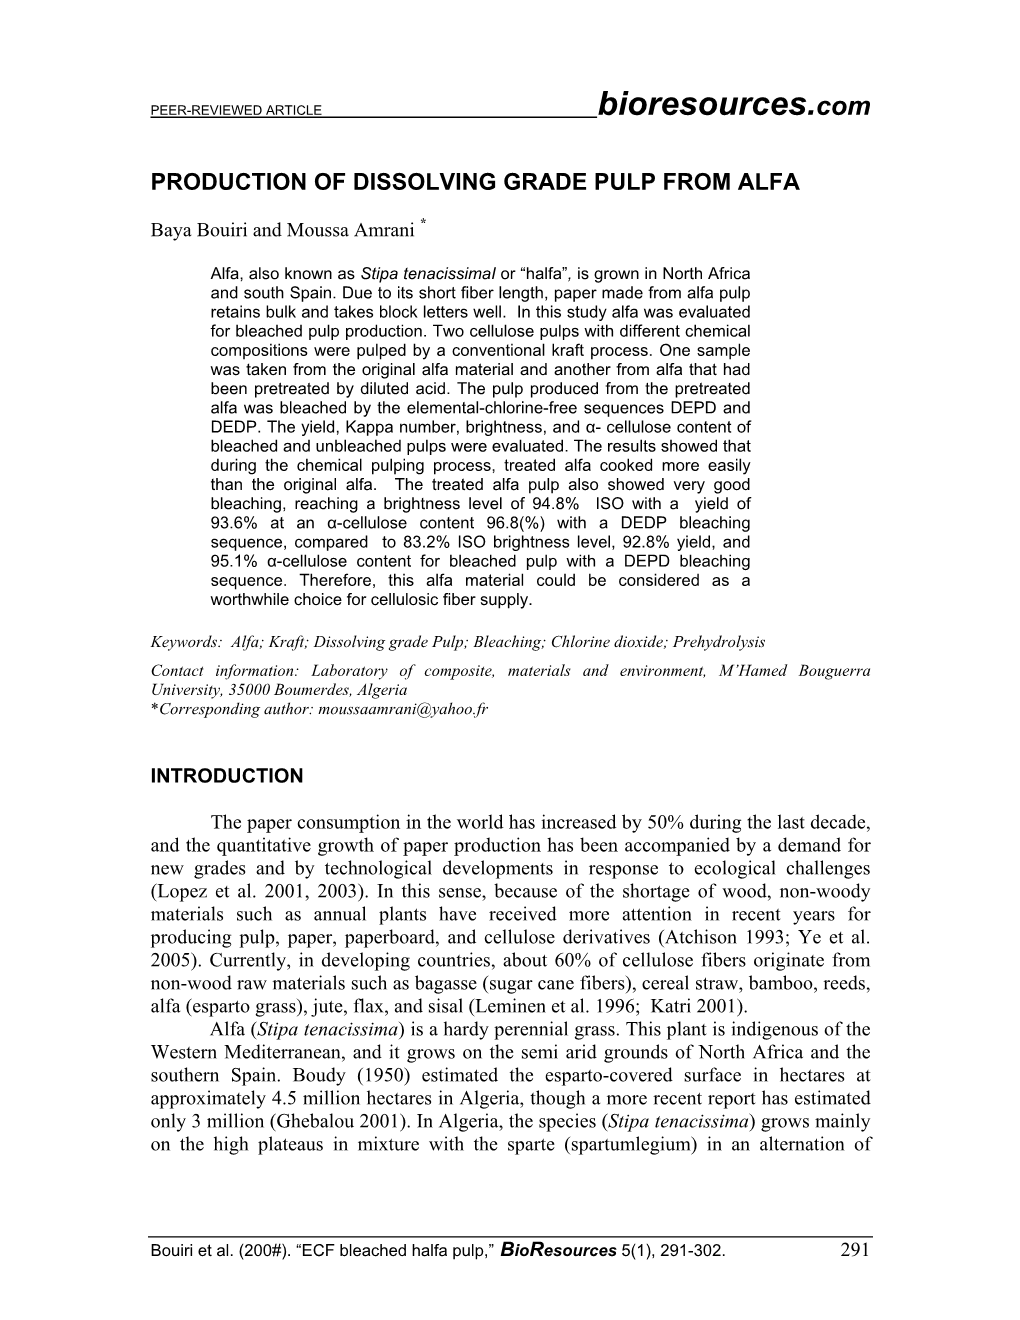 Production of Dissolving Grade Pulp from Alfa